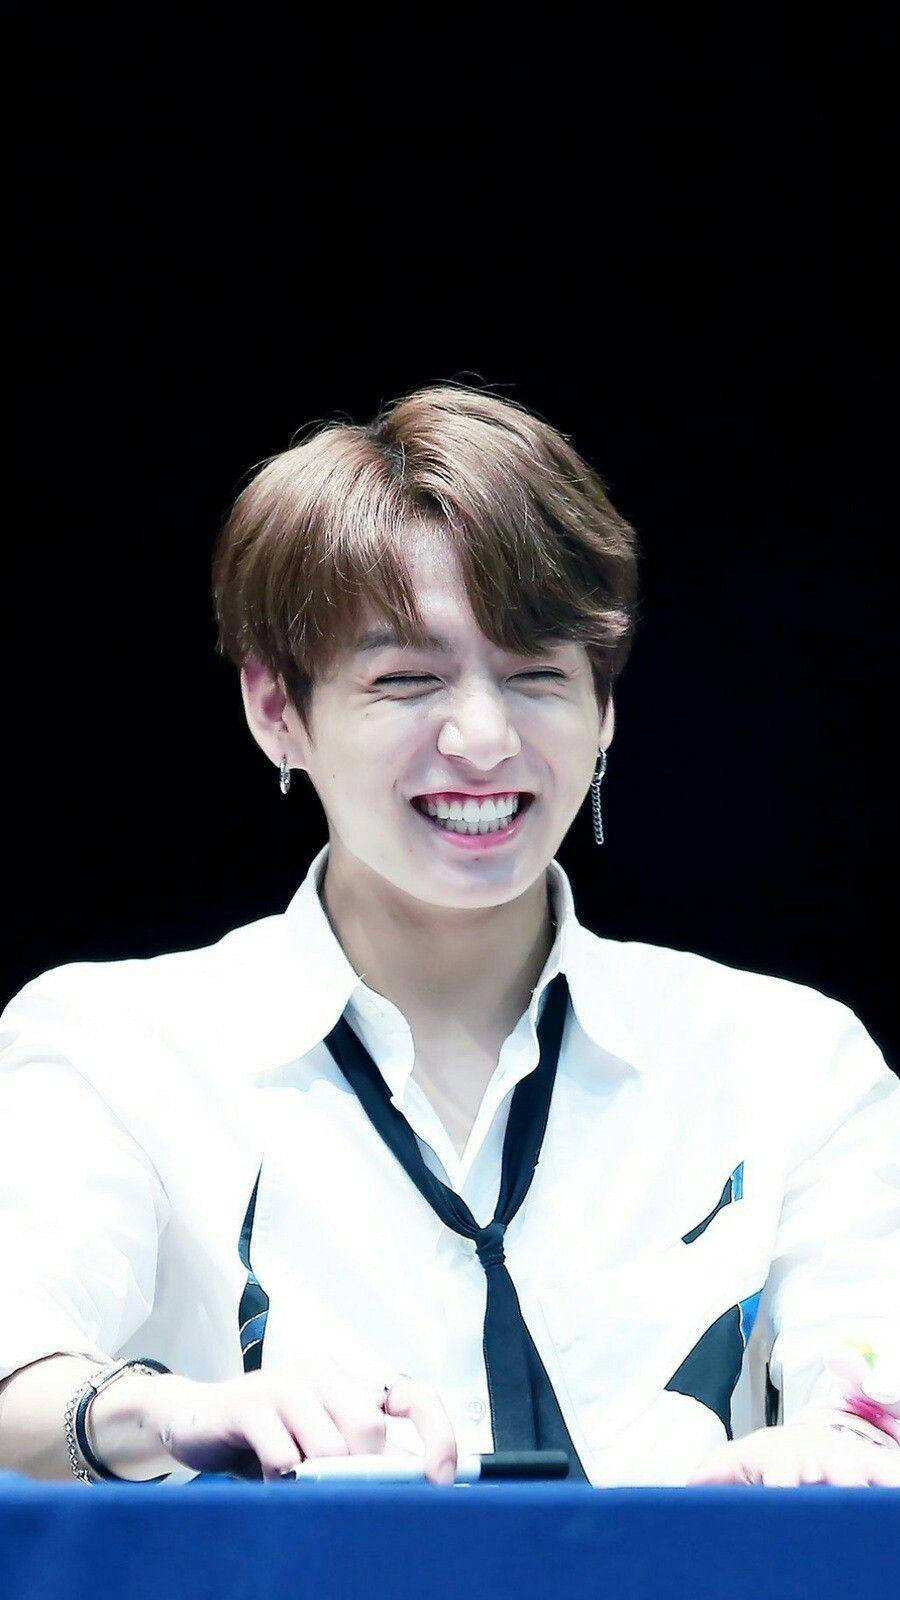 Cute Bts Jungkook Smiling At Fanmeet Background